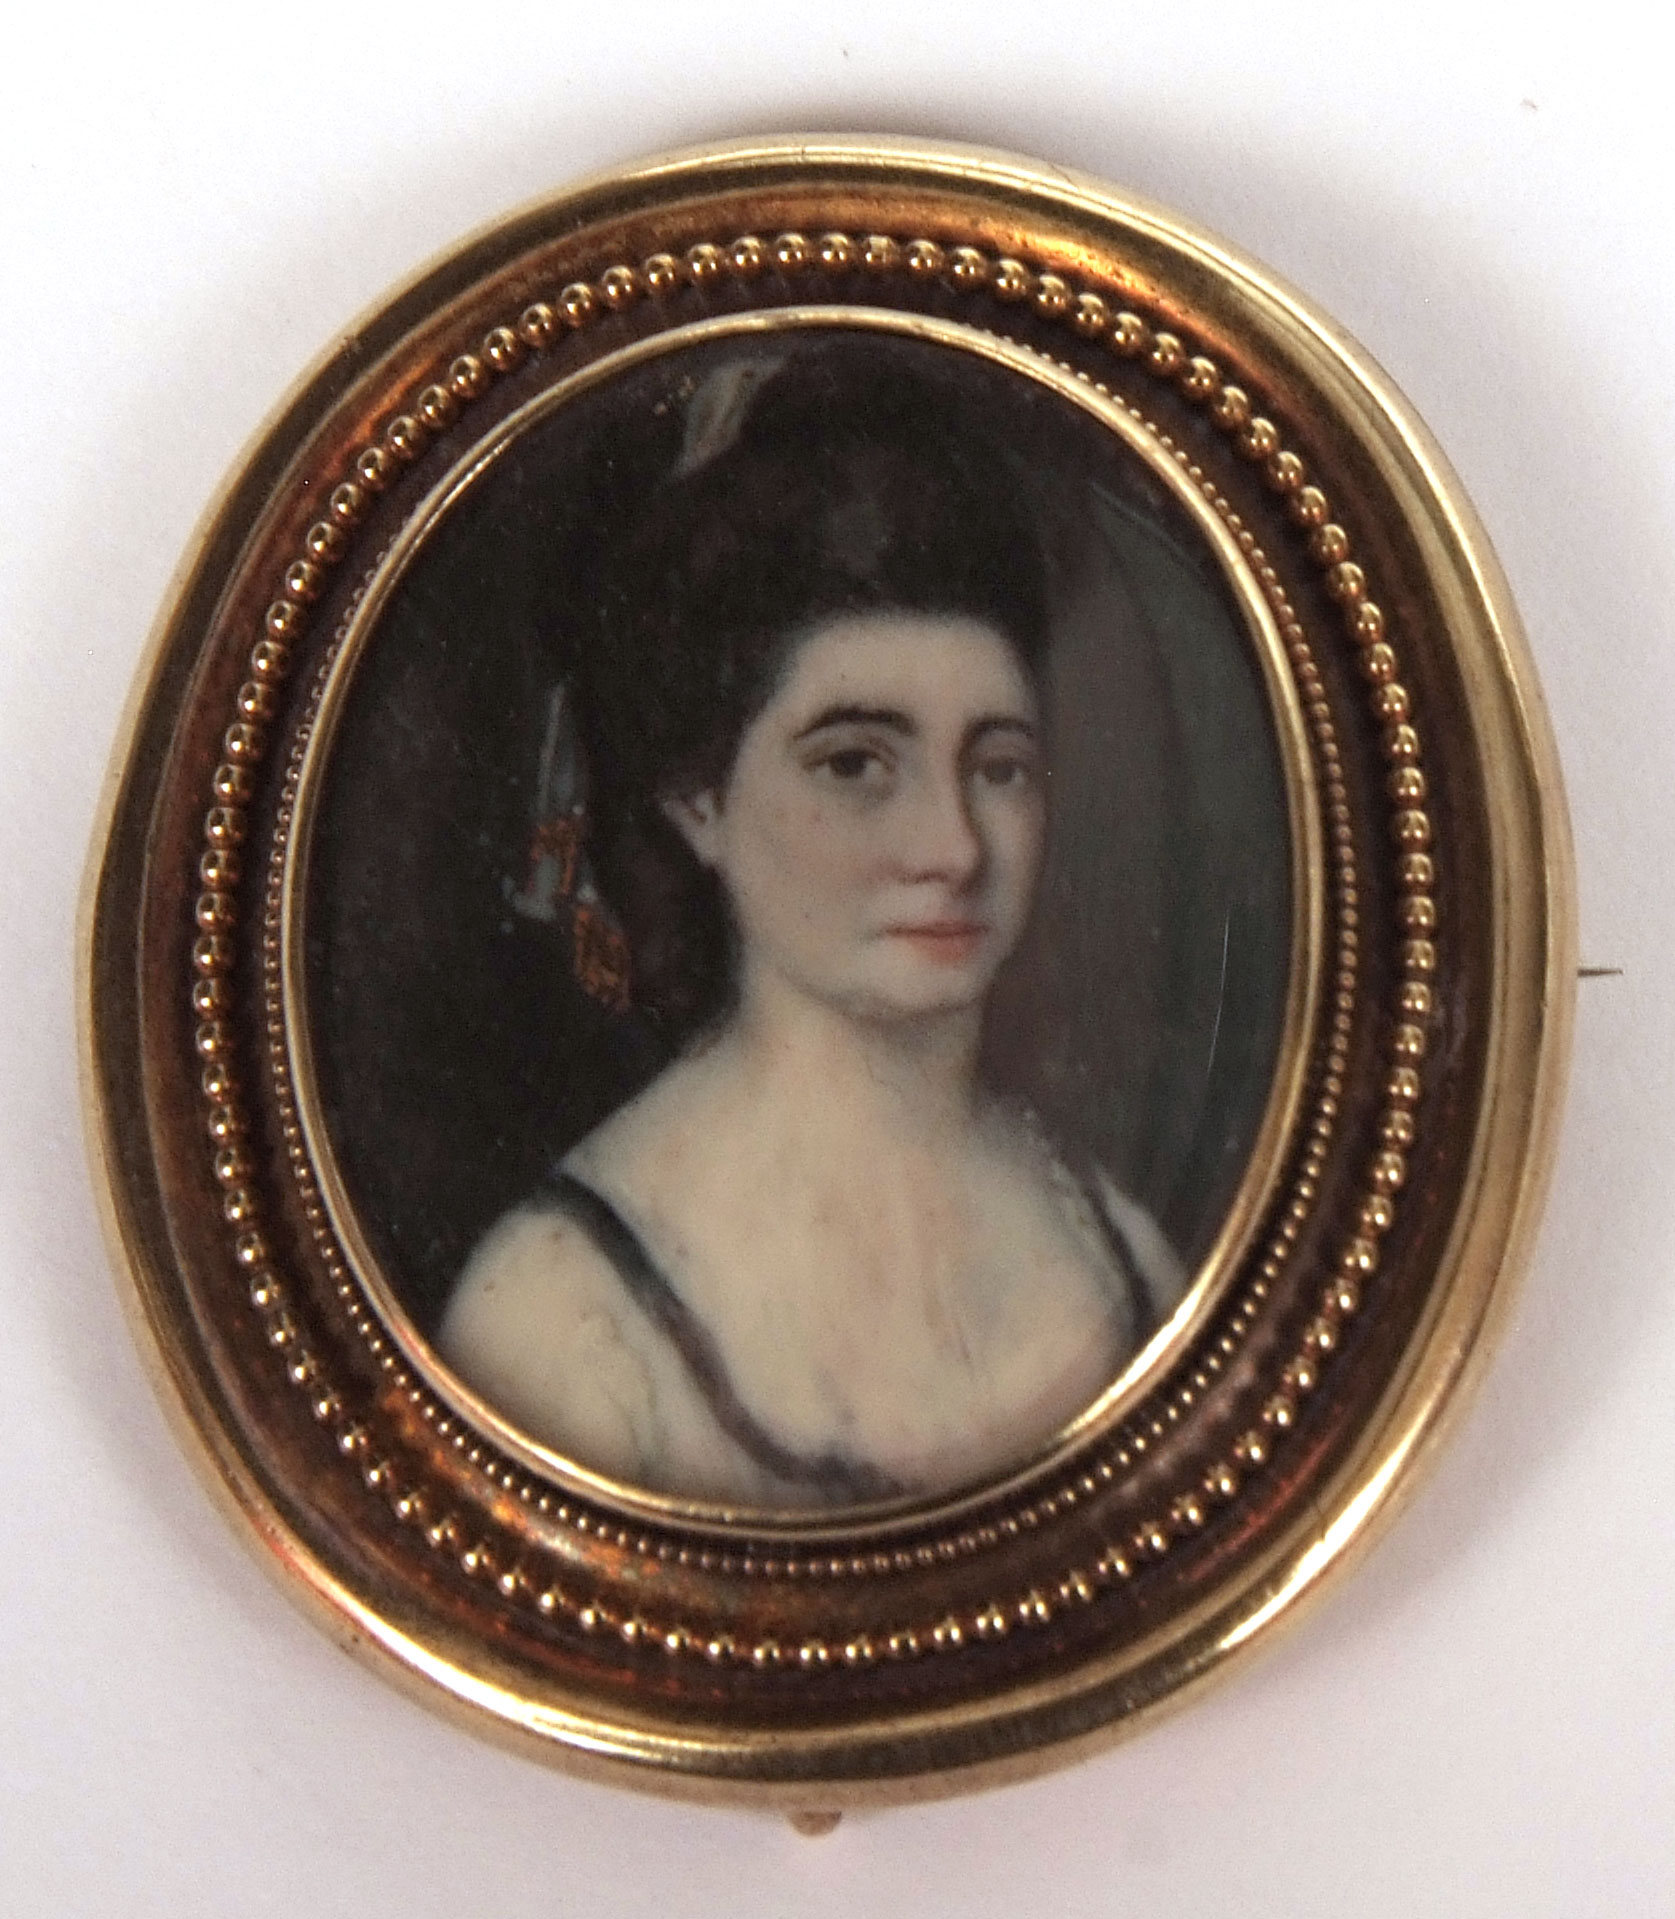 ENGLISH SCHOOL (19TH CENTURY) Head and shoulders portrait of a lady portrait miniature set in brooch